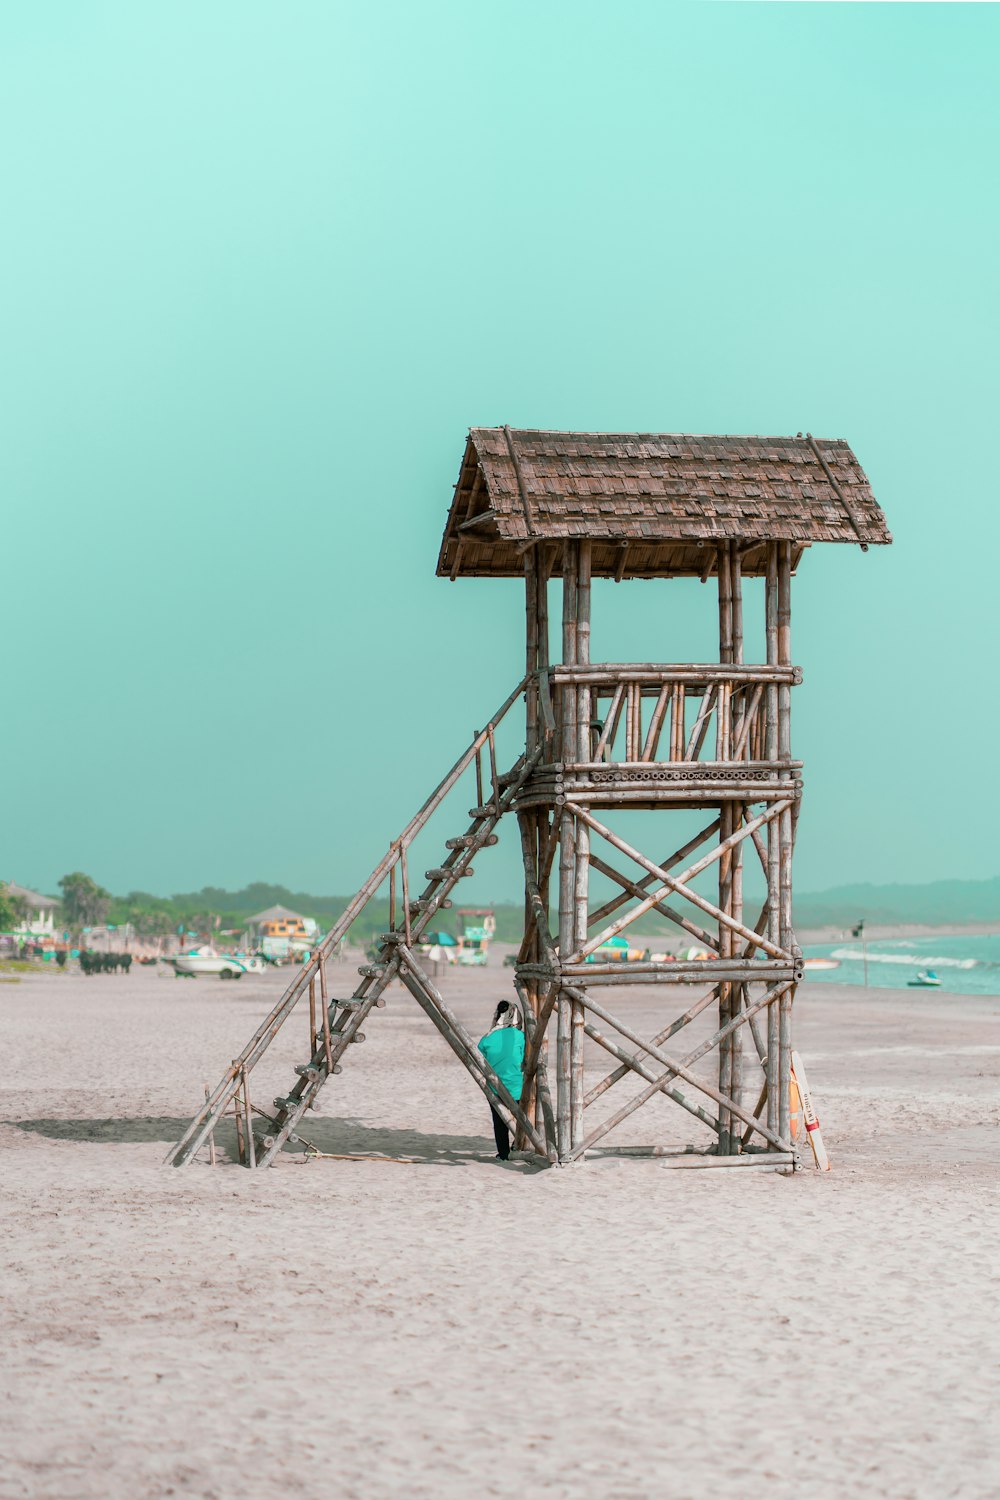 a lifeguard tower on the beach with a person standing on it